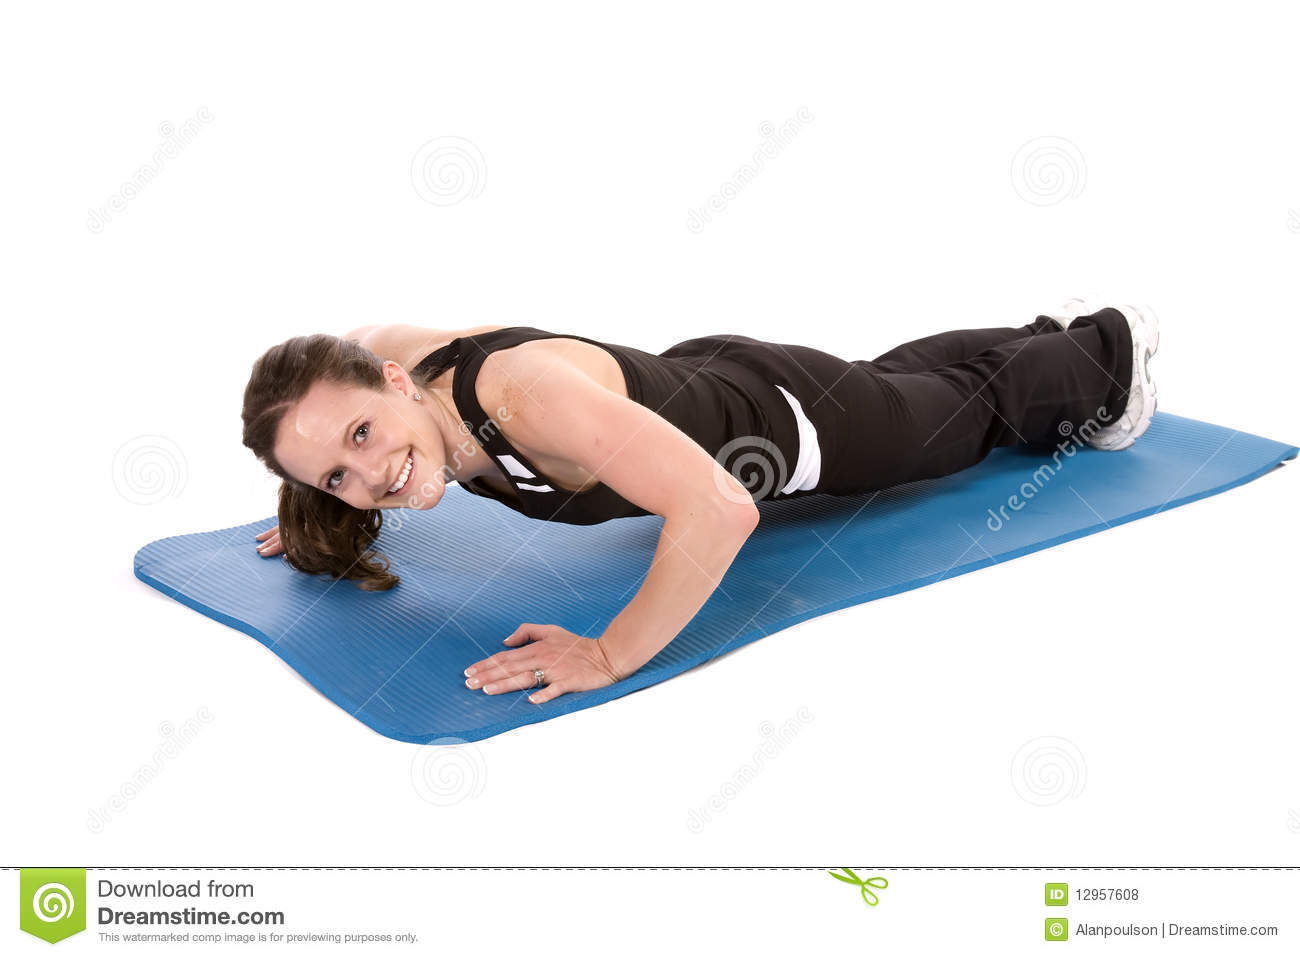 Woman Doing A Push Up Using Her Strength With A Smile On Her Face